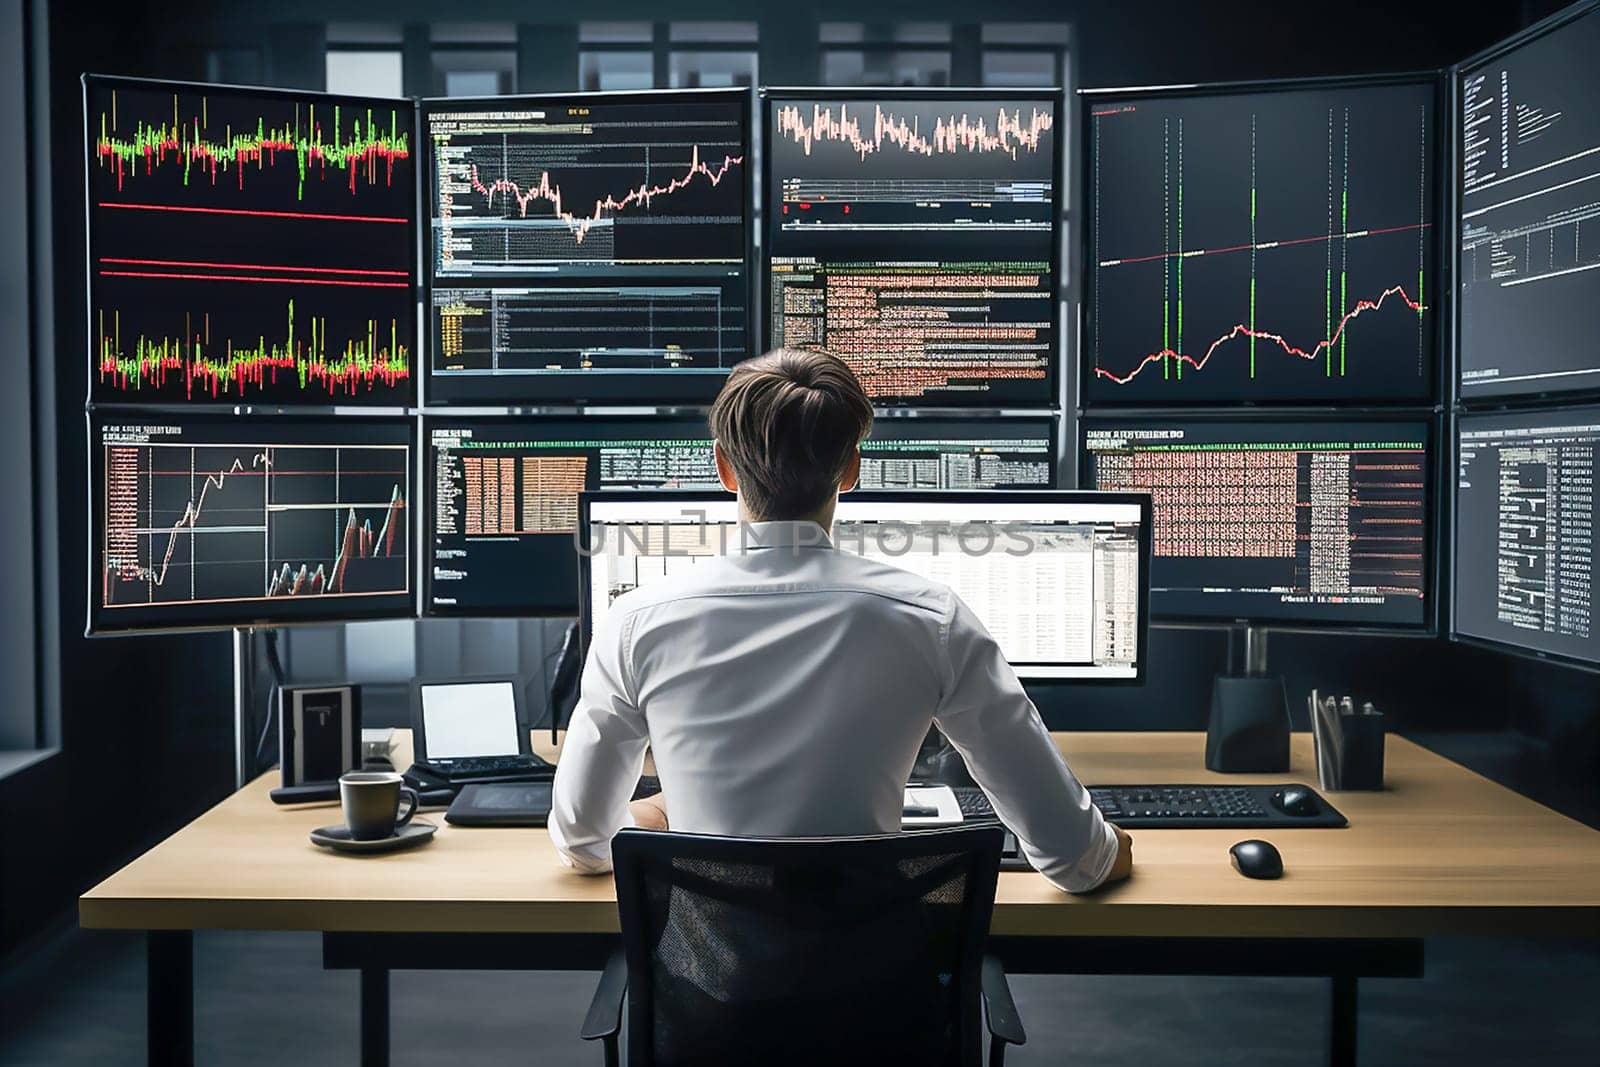 A trader of a brokerage agency trades on the stock exchange, analyzes charts on a monitor, sitting at a desk in the office, a view from the back, dressed in a white shirt.